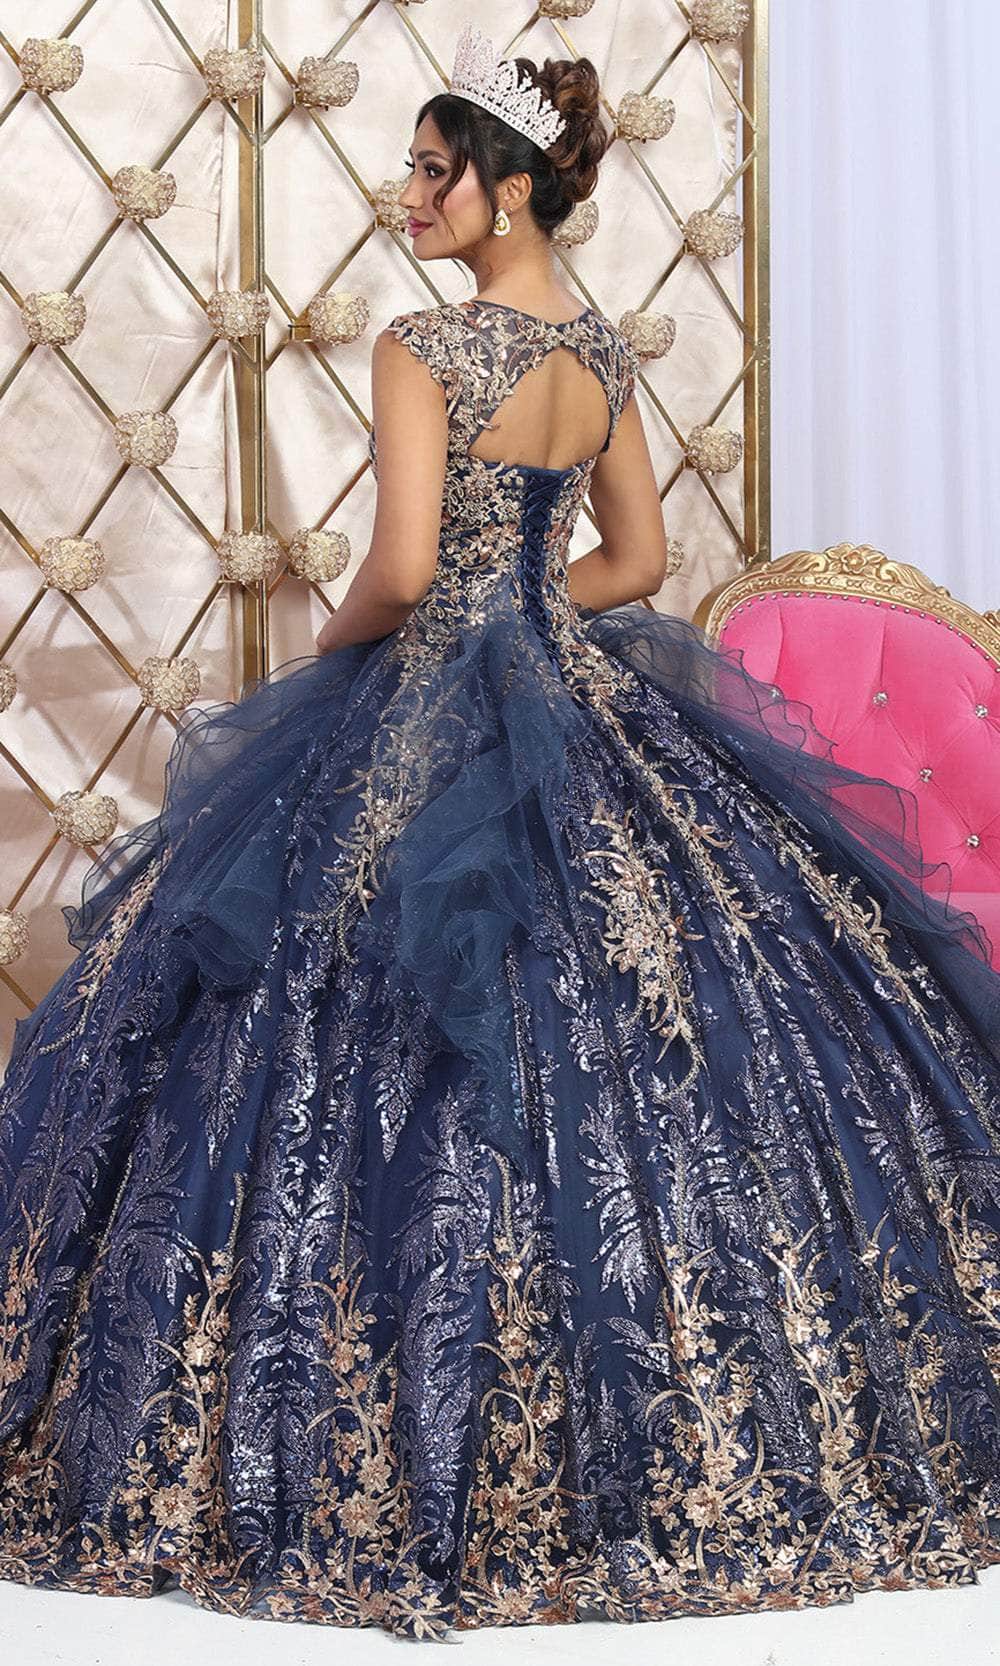 May Queen LK231 - Metallic Embroidered Ballgown Quinceanera Dresses 